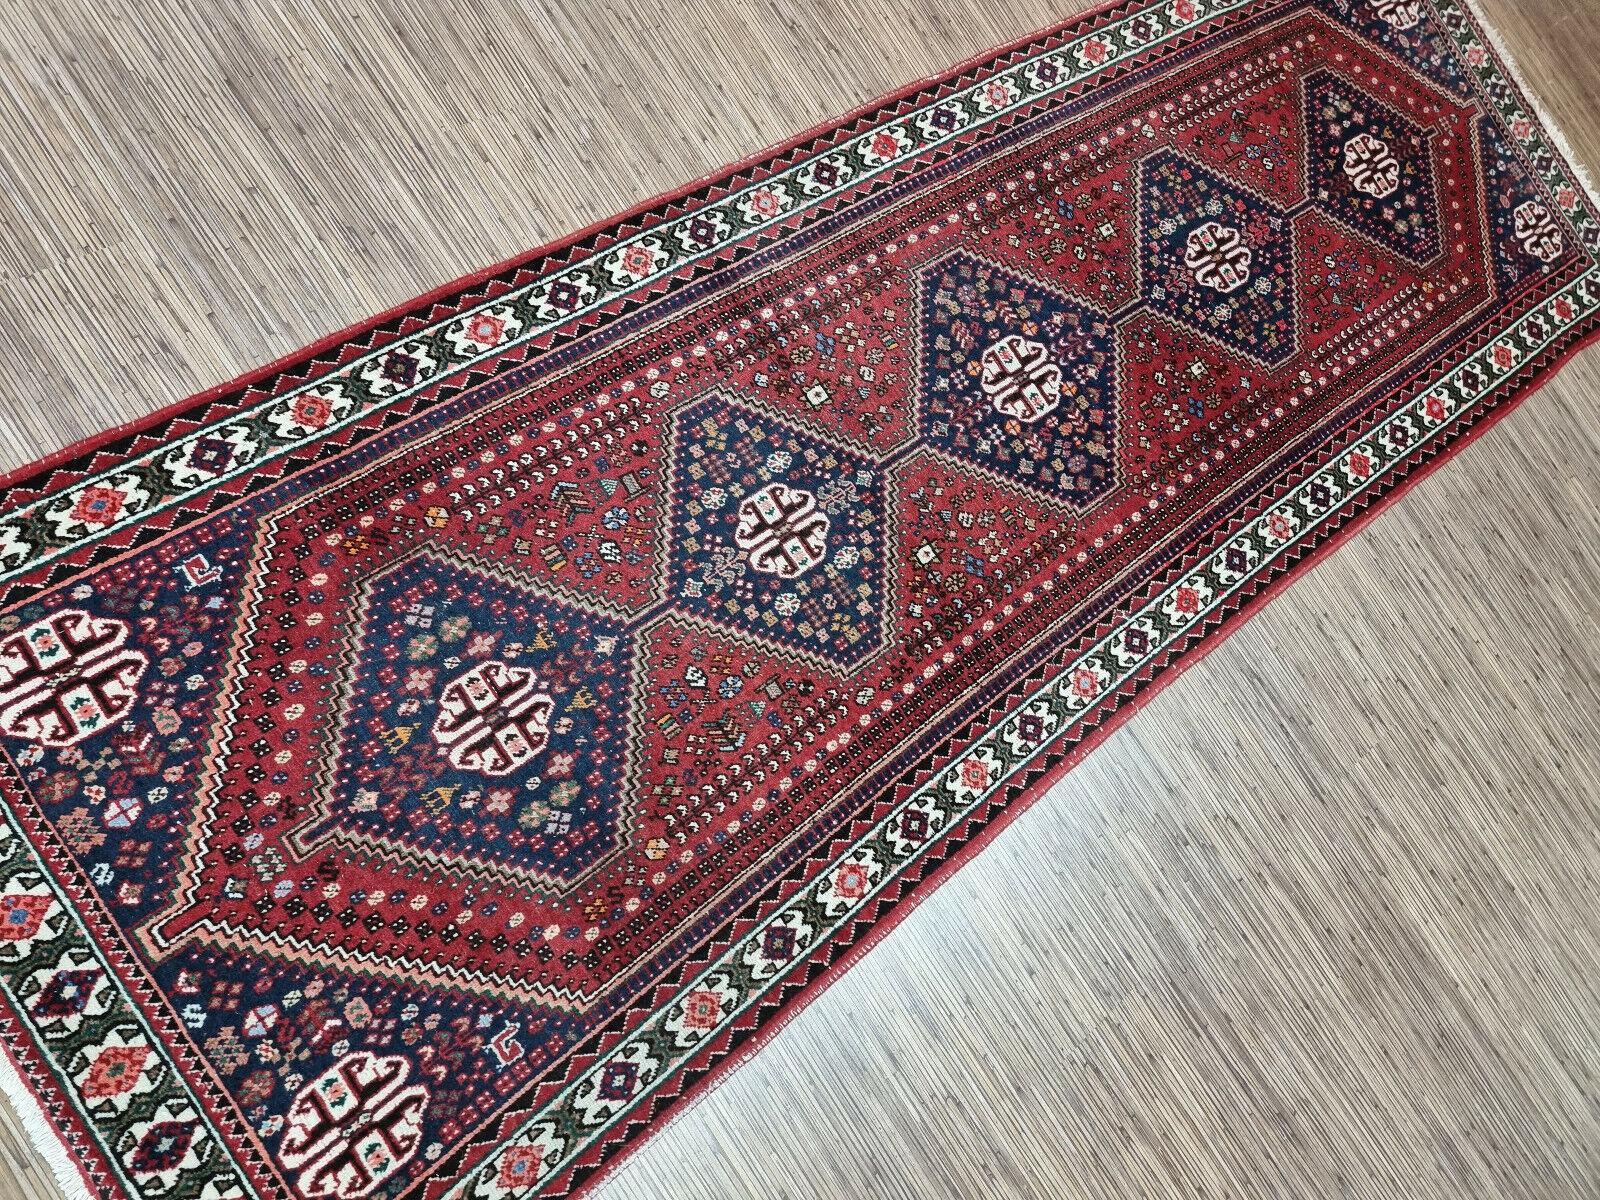 Handmade Vintage Persian Style Shiraz Rug 3.1' x 9.2', 1960s - 1D99 For Sale 5